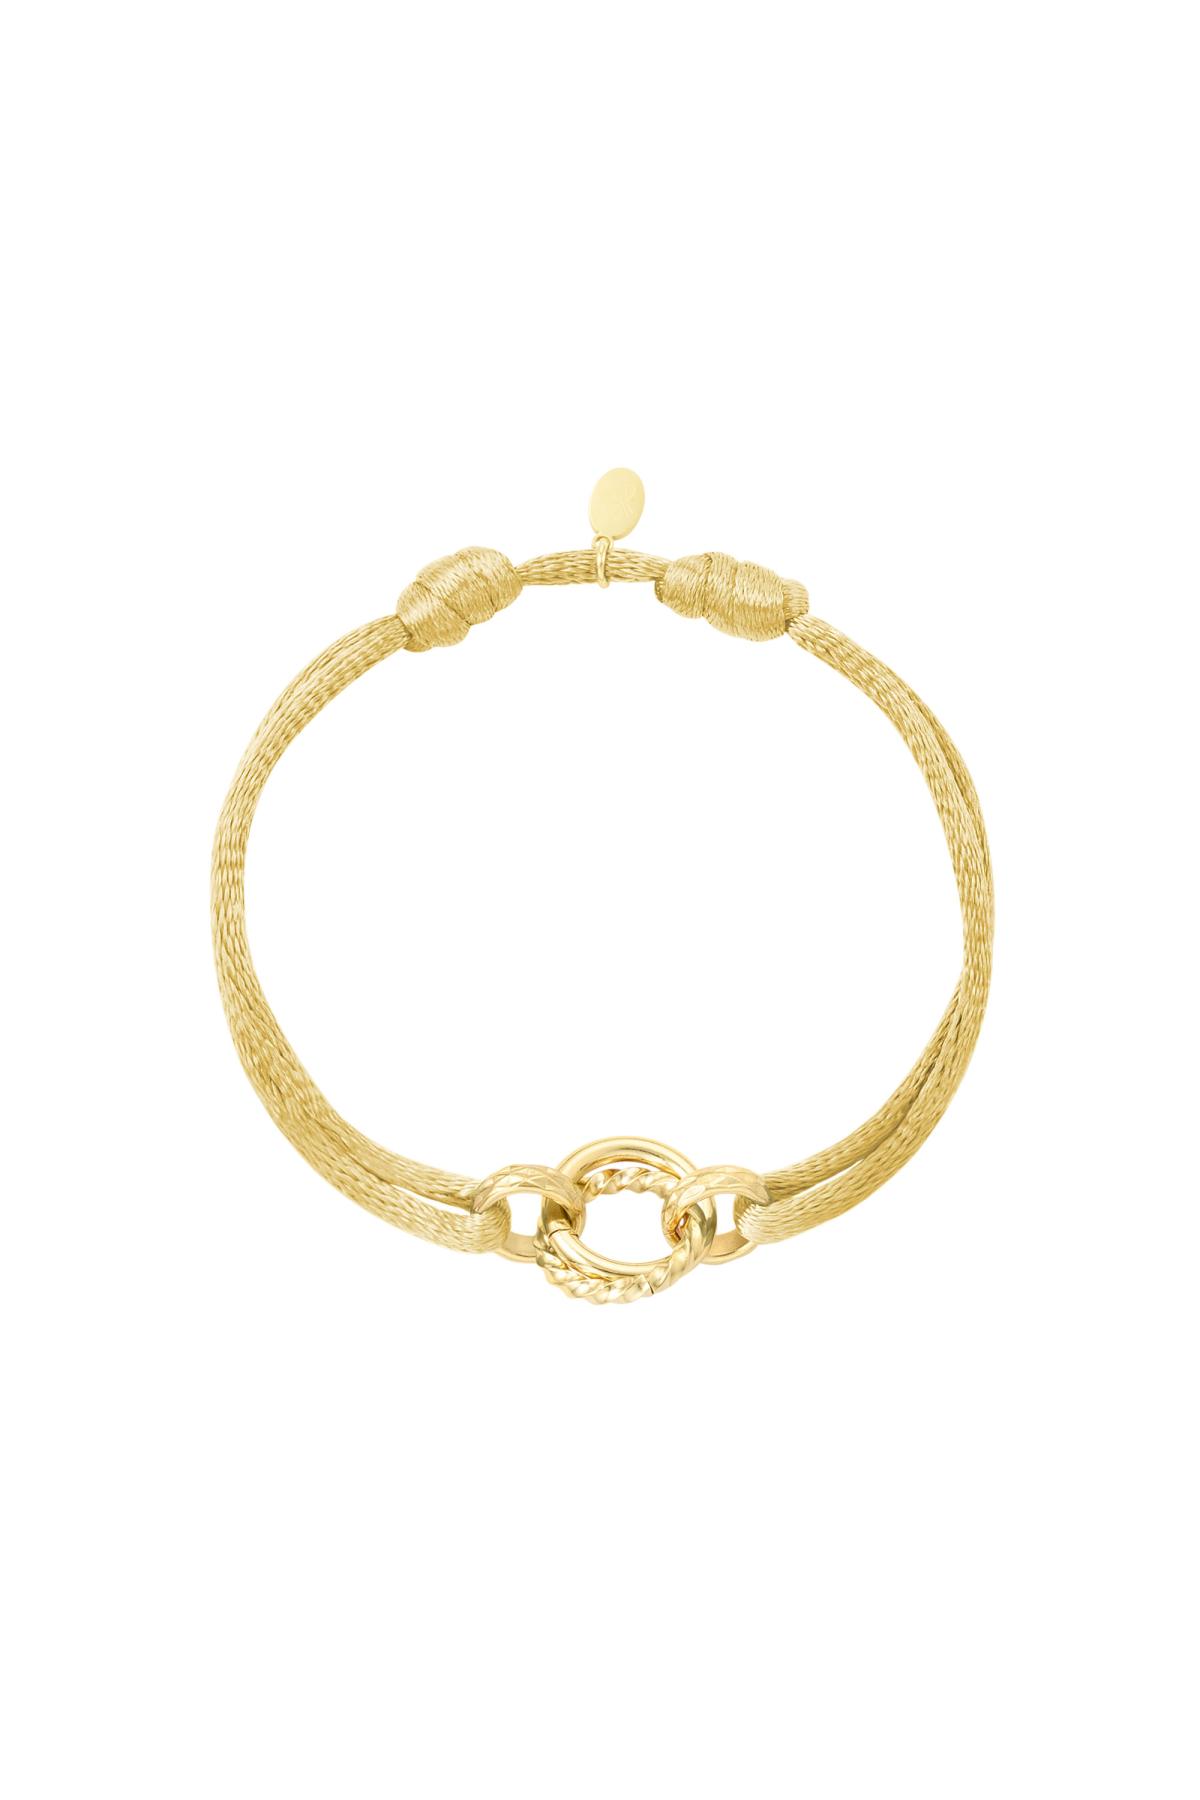 Cerchio bracciale in tessuto Champagne Stainless Steel h5 